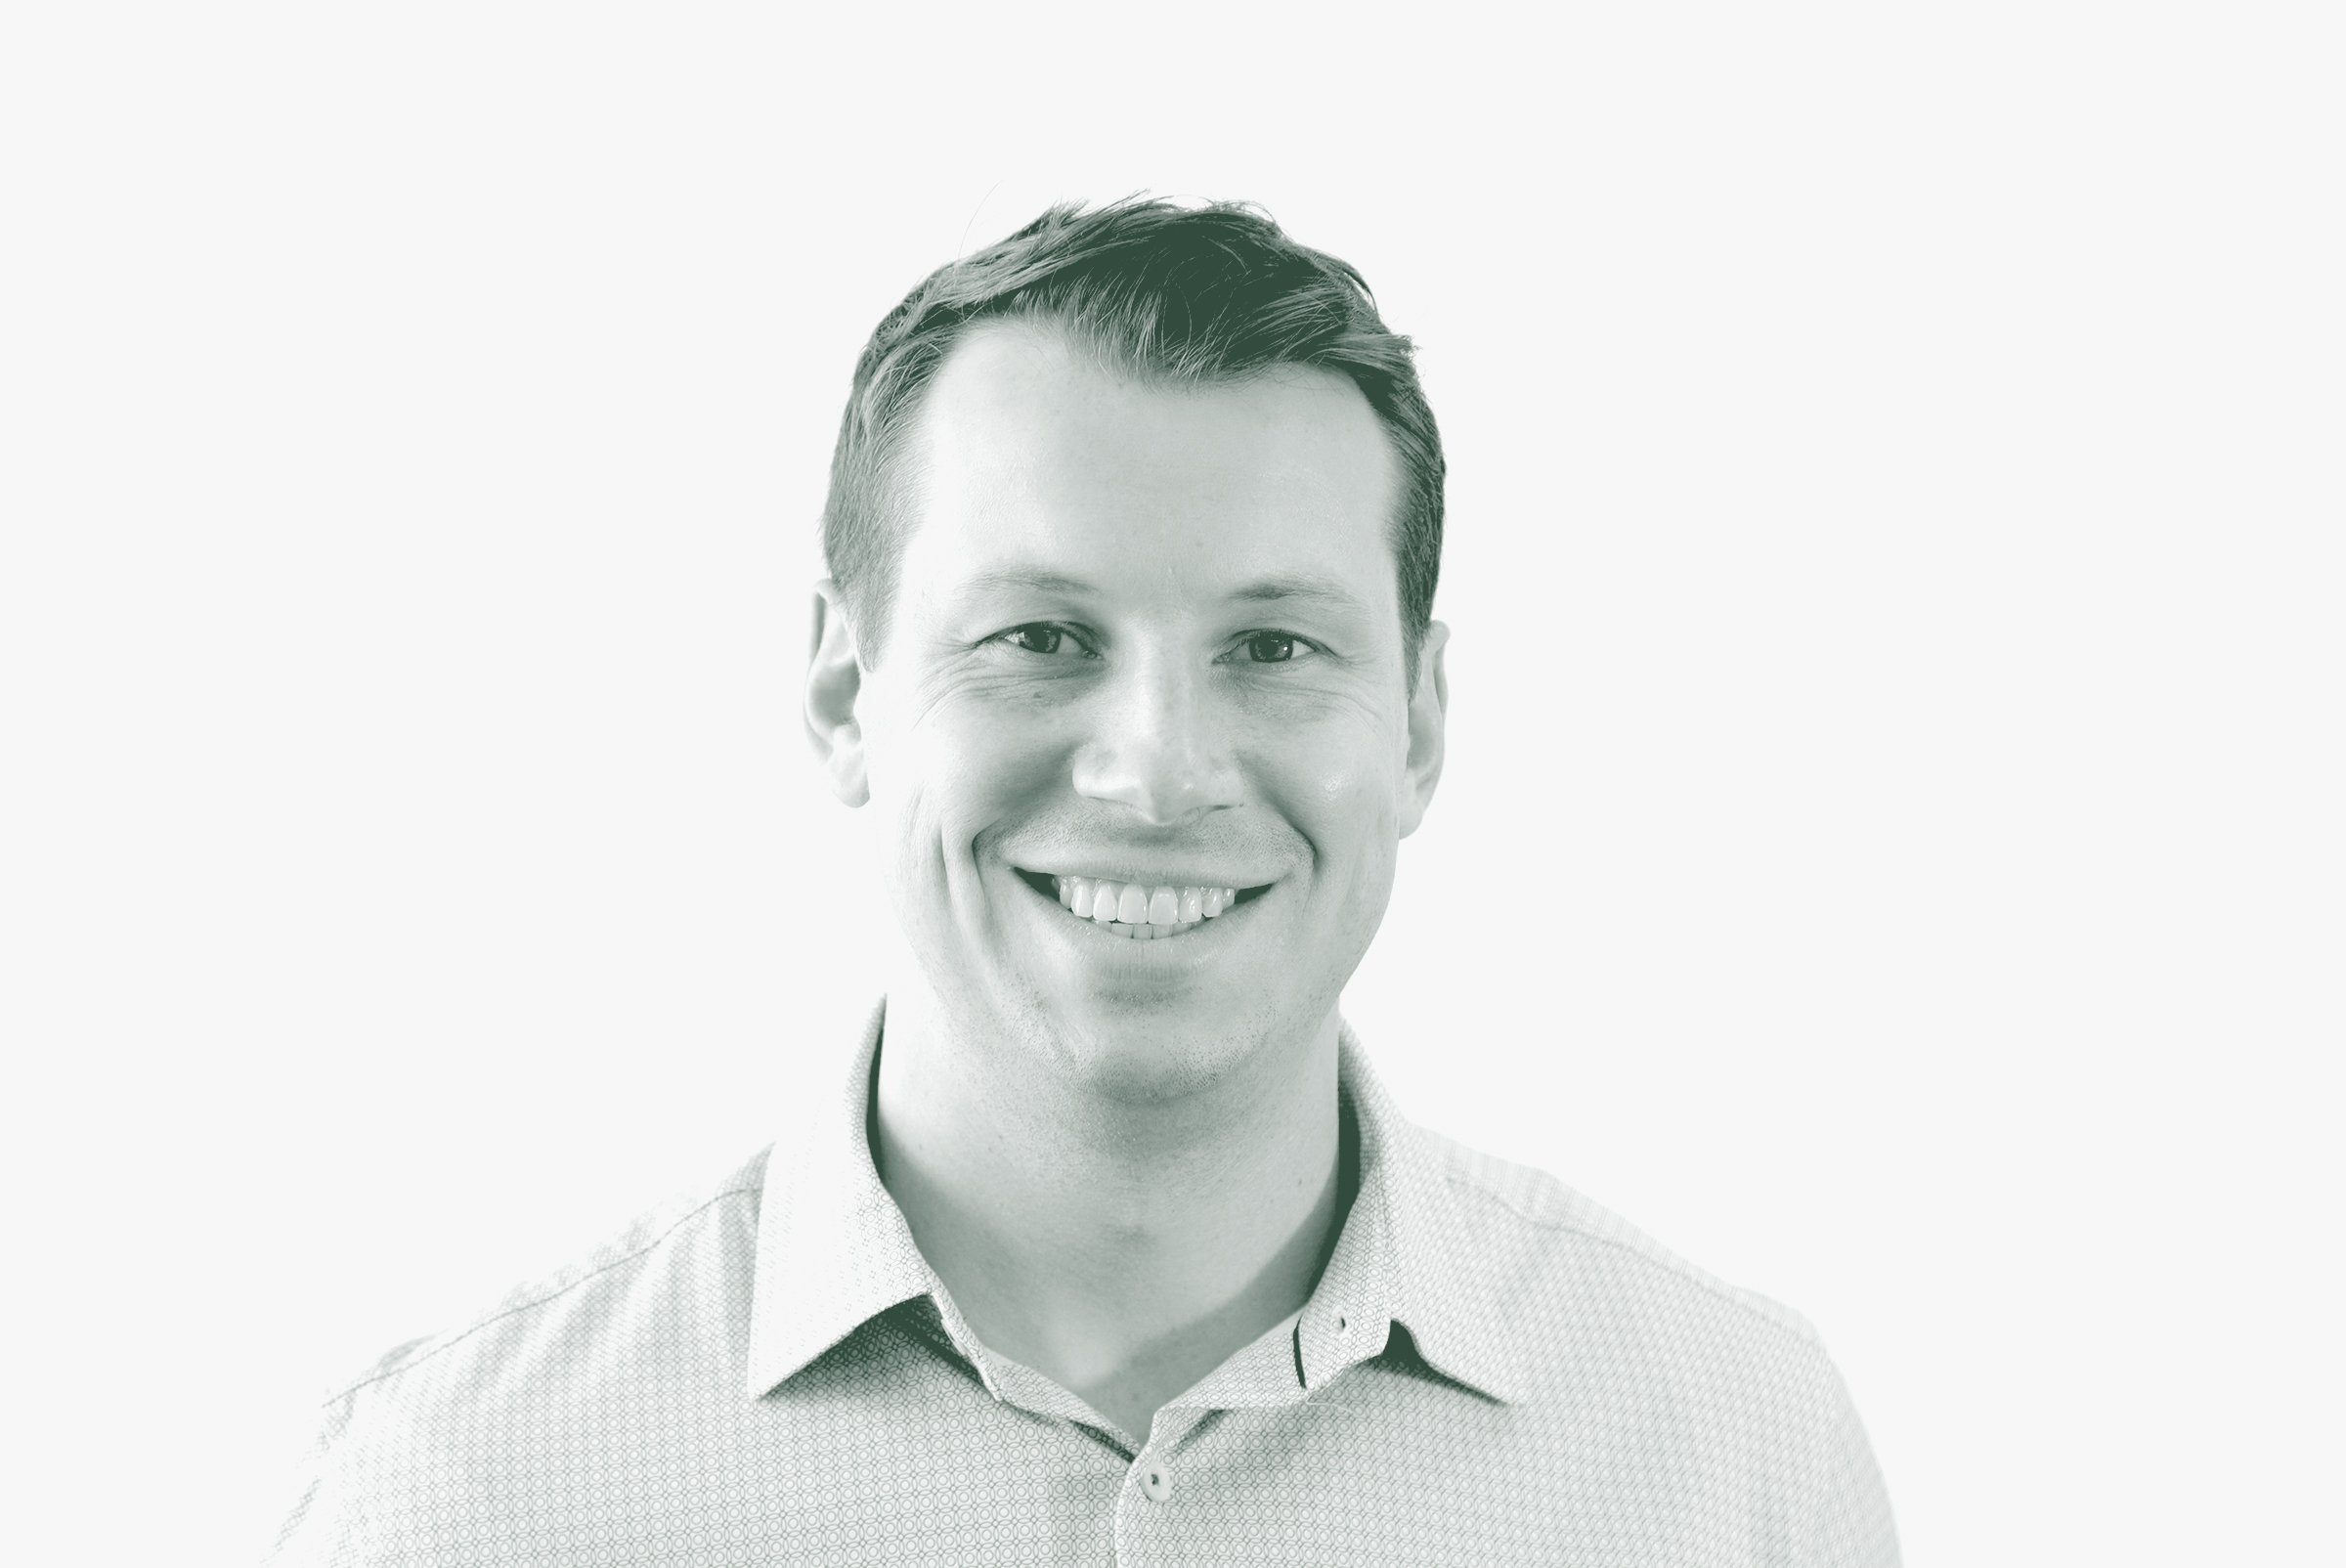 A black and white portrait of Garrett Barker, an Associate and Senior Project Leader with GFF in the Civic Studio, in front of a white background.